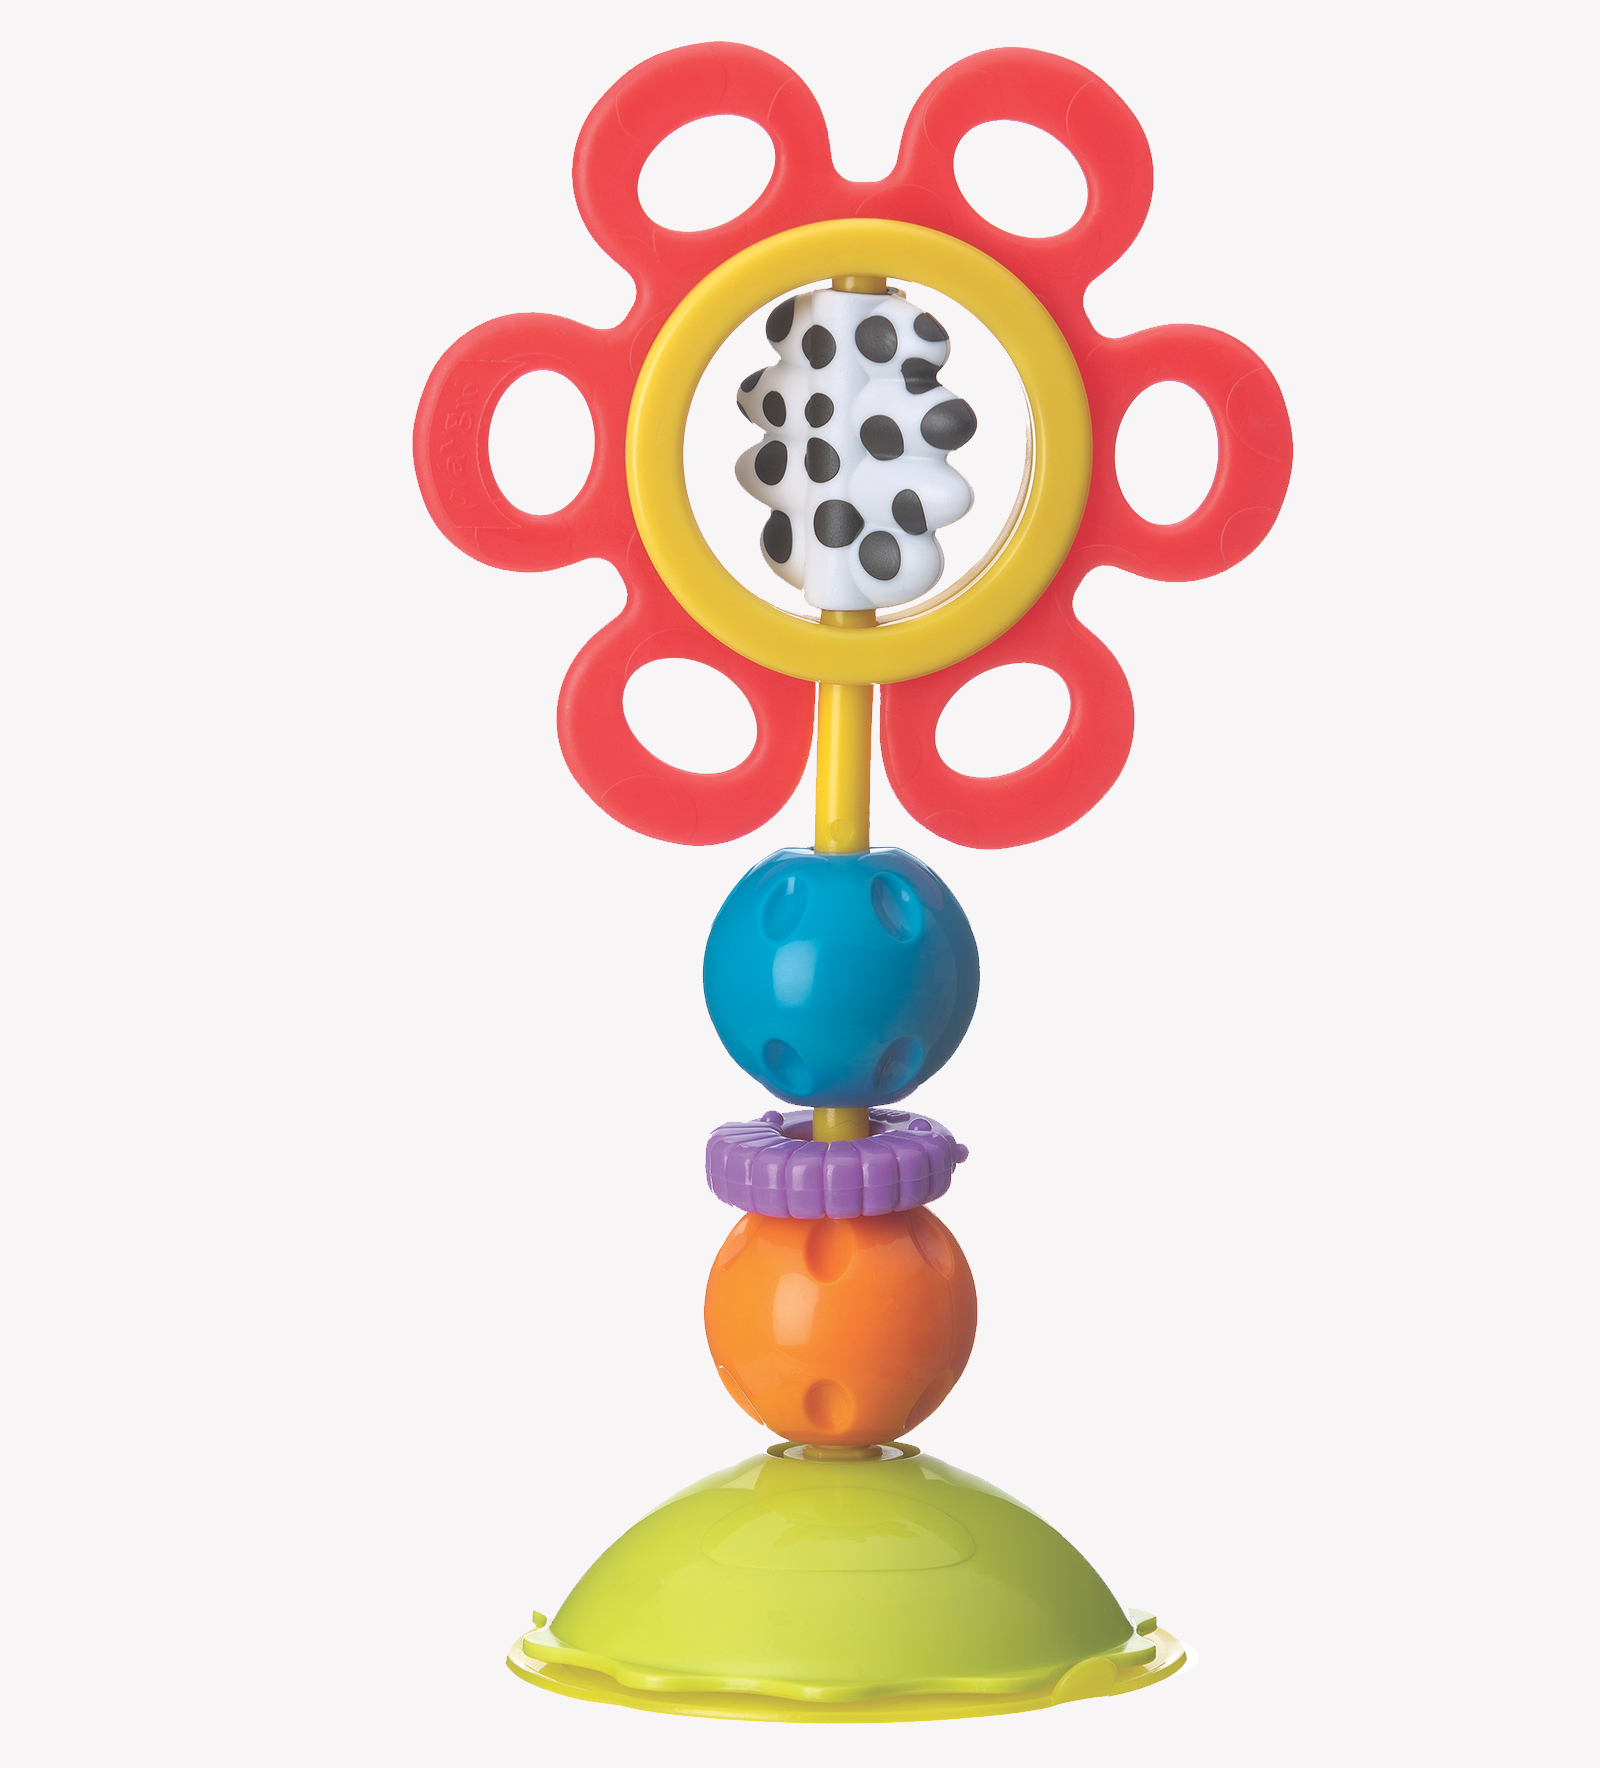 Twist and Chew High Chair Toy